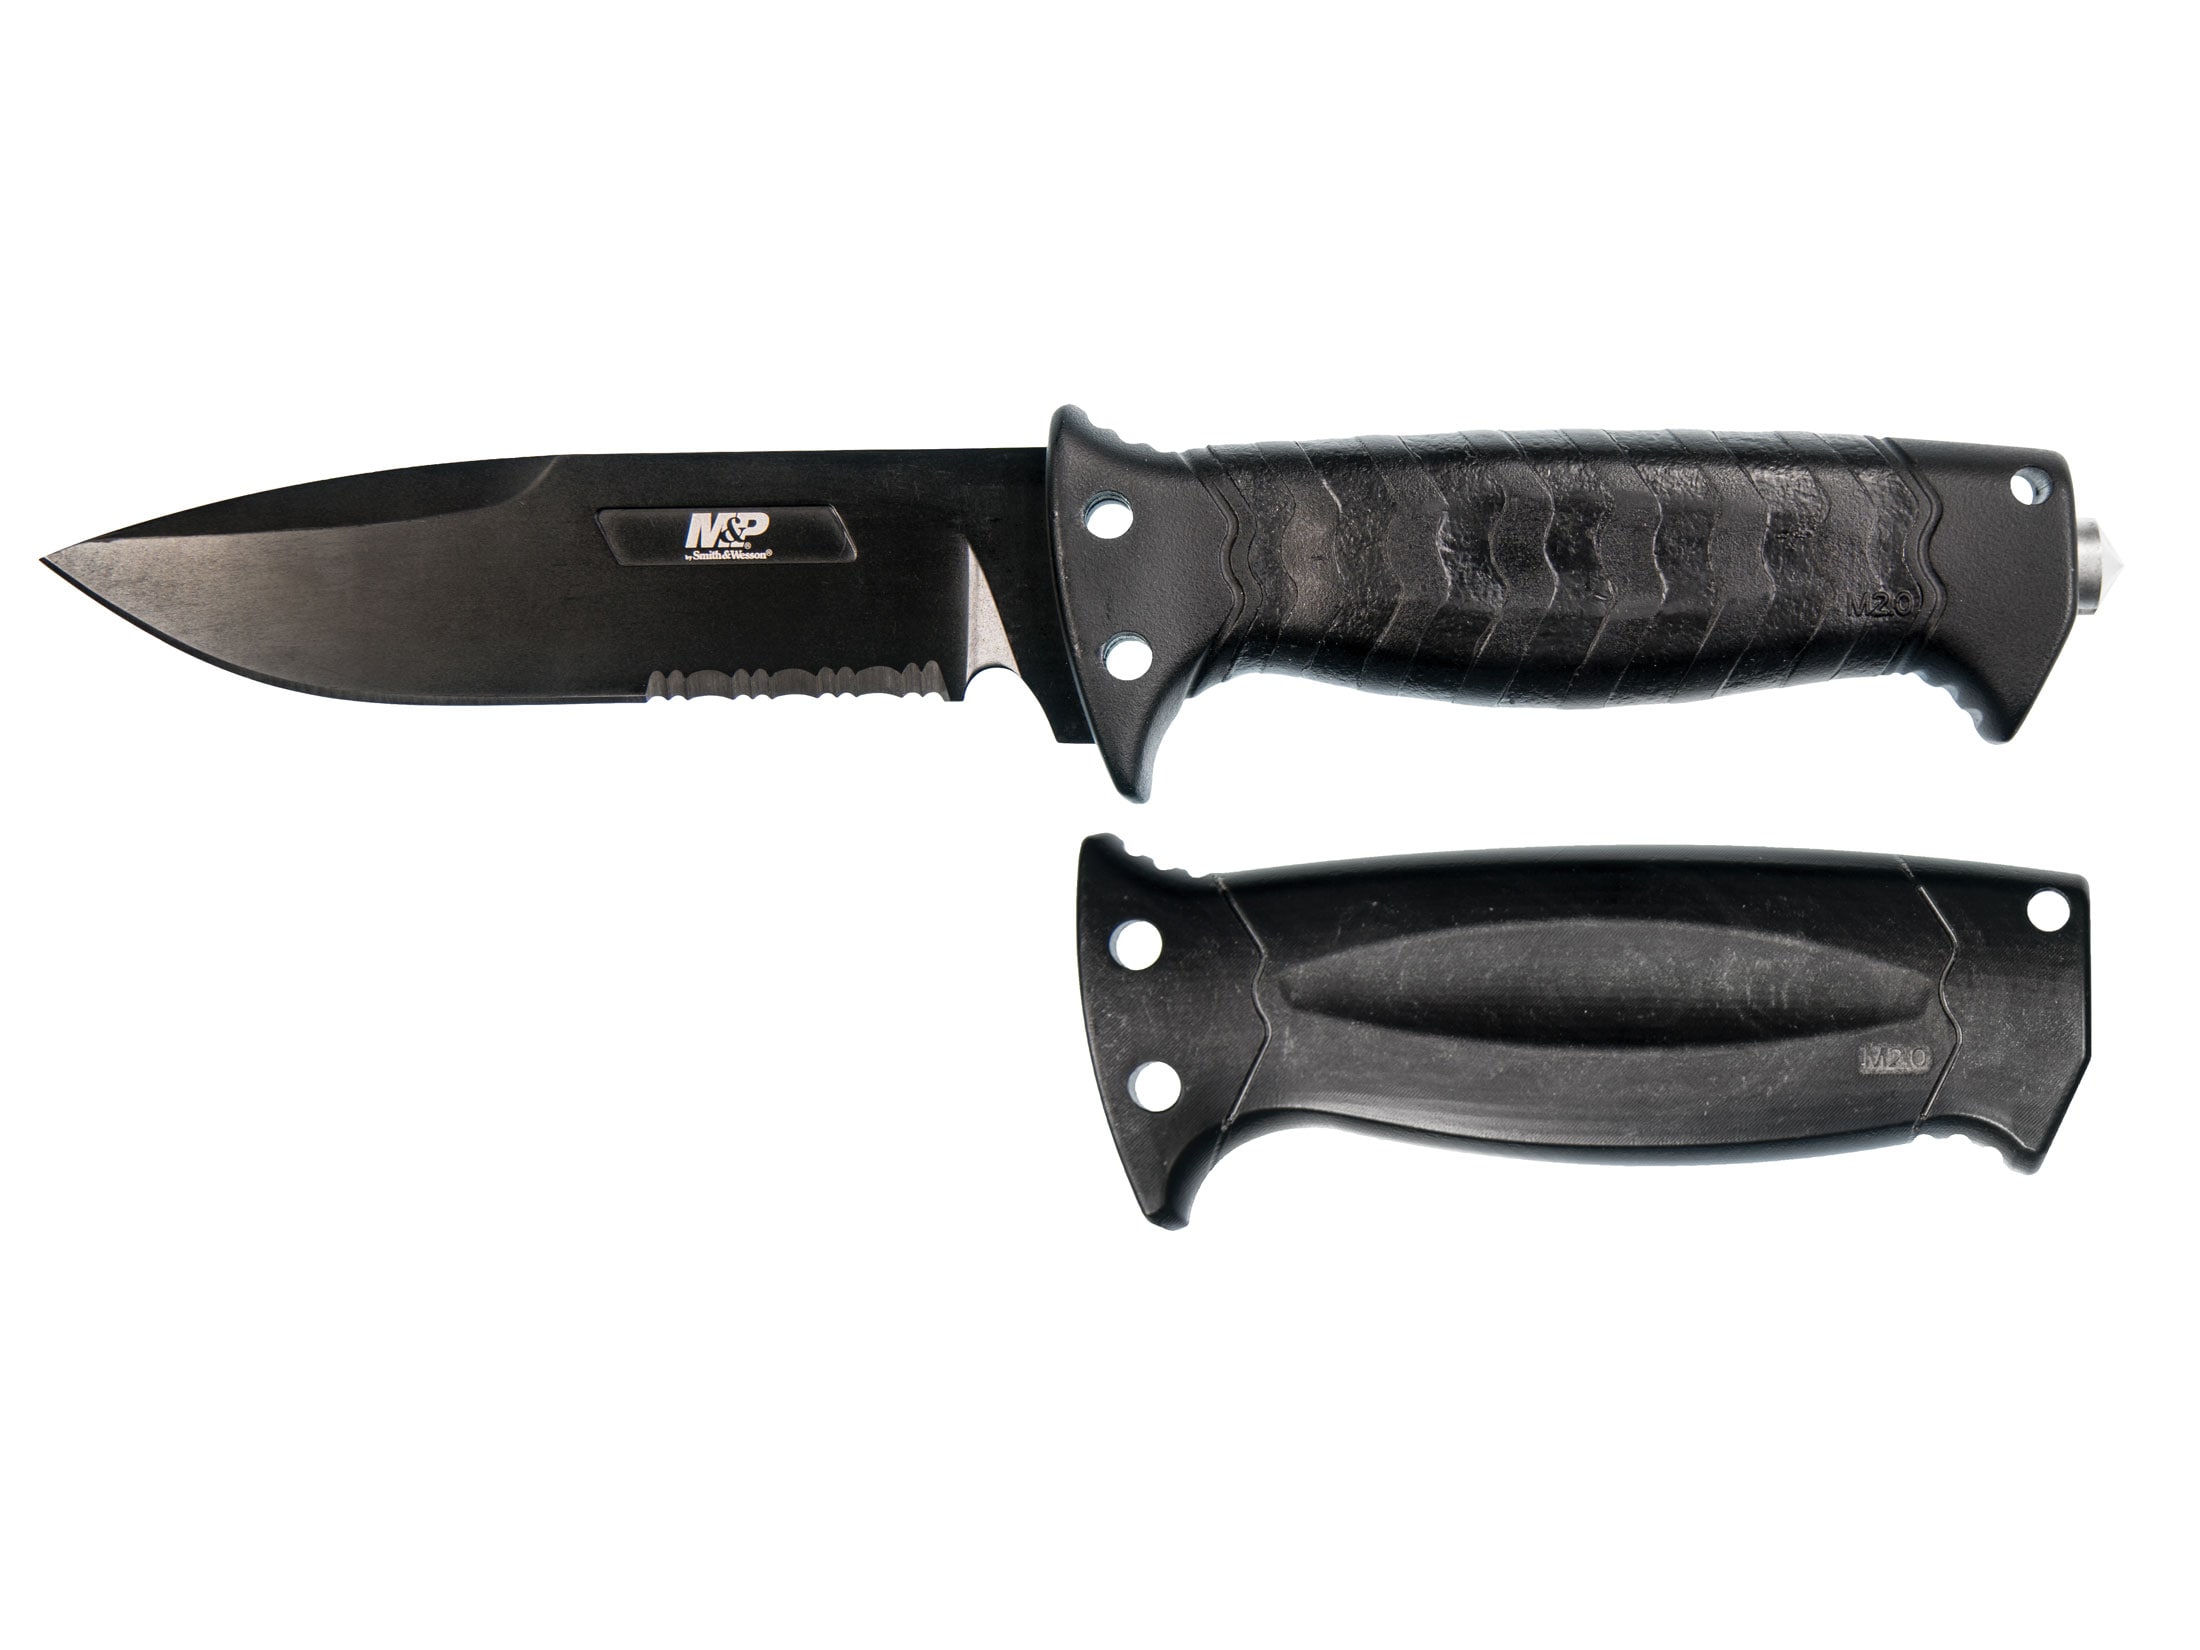 Smith, Wesson M&P 2.0 GripSwap Fixed Blade Knife 5 Partially Serrated